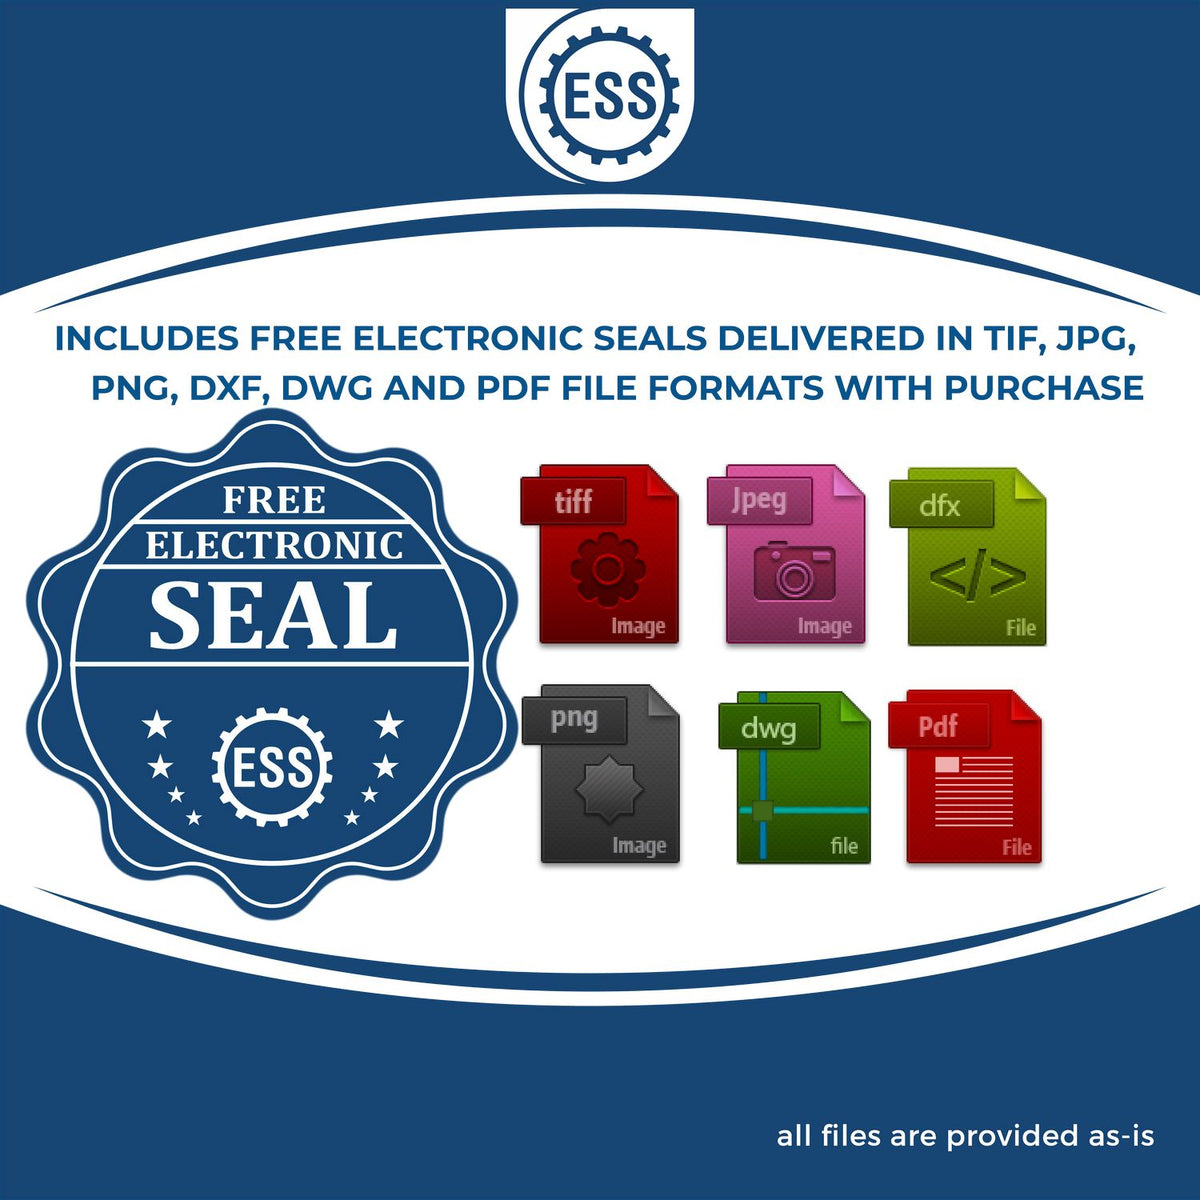 An infographic for the free electronic seal for the Hybrid Oklahoma Landscape Architect Seal illustrating the different file type icons such as DXF, DWG, TIF, JPG and PNG.